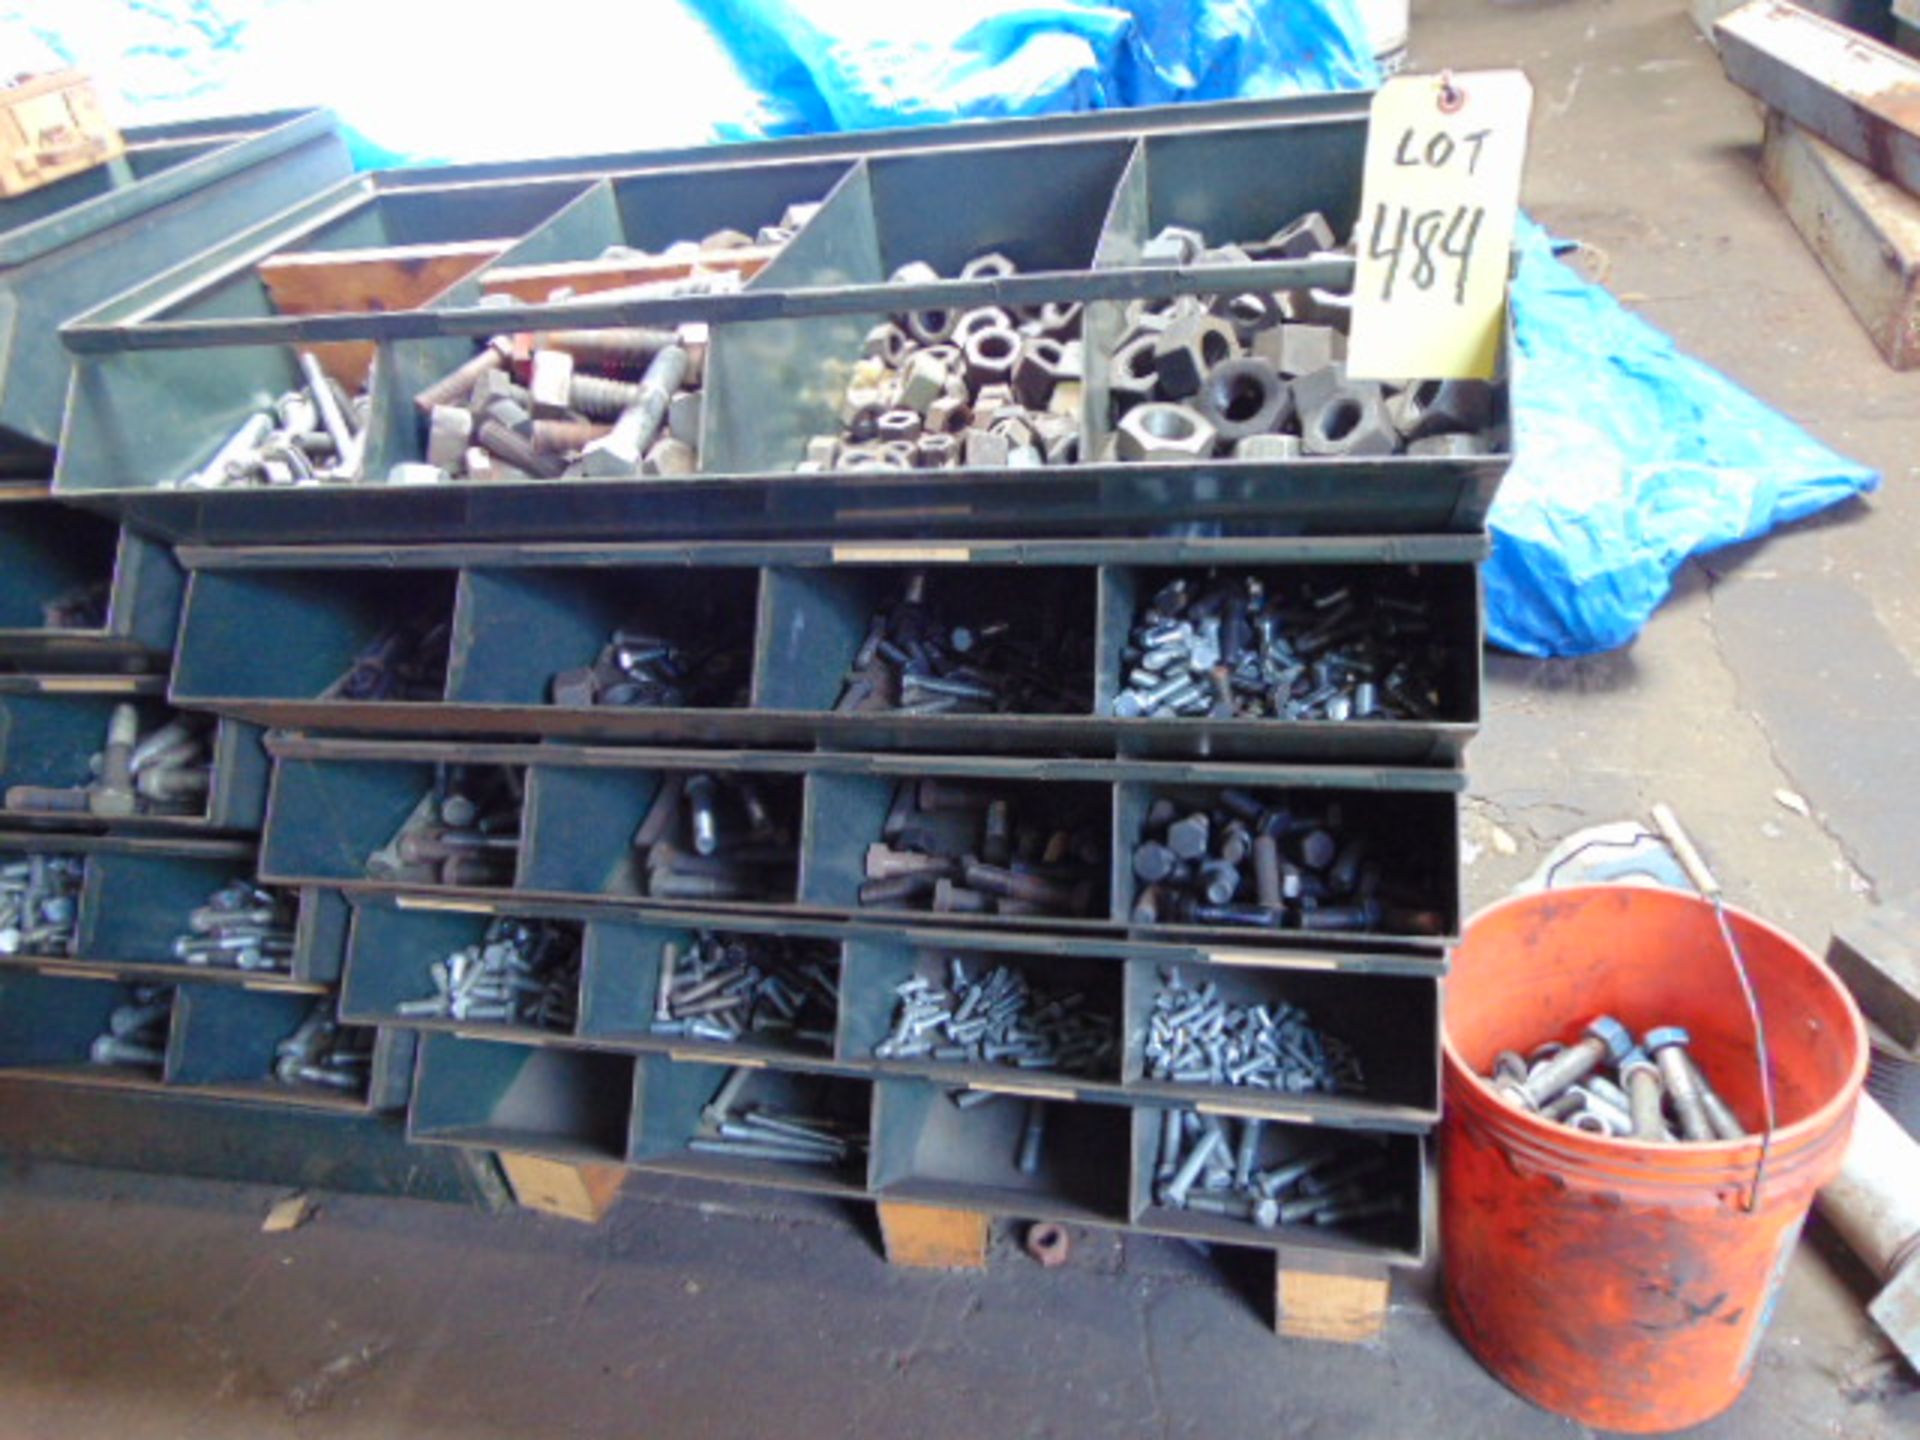 LOT CONSISTING OF: assorted nuts, bolts, hardware, steel bins & (2) sections of shelving - Image 2 of 5